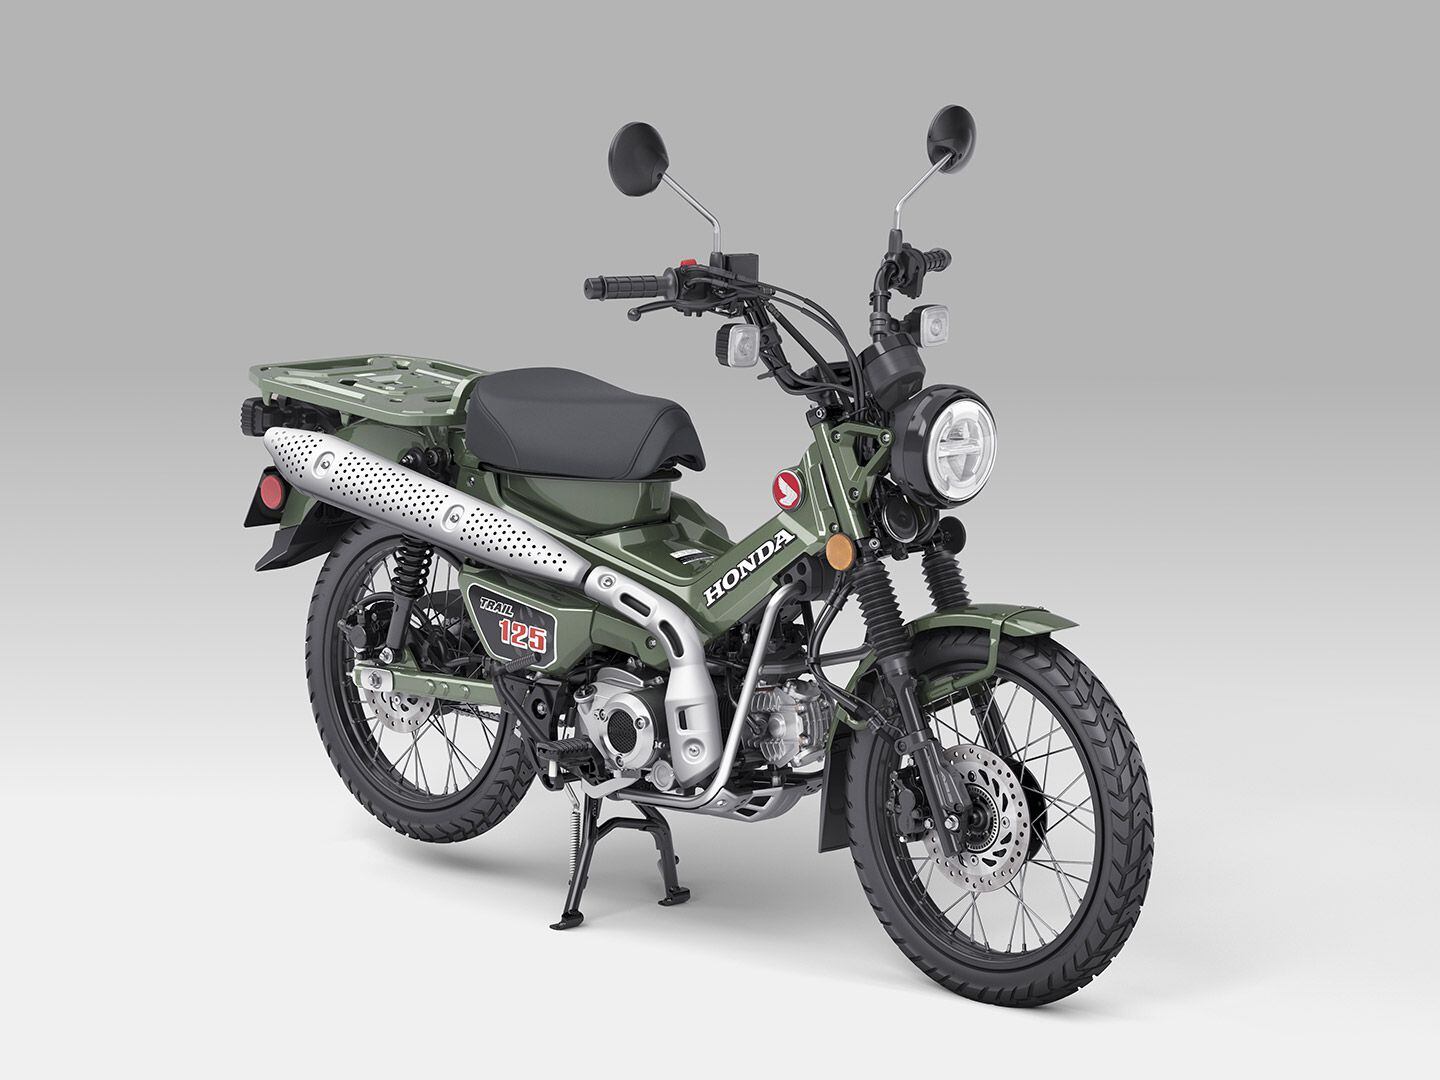 Honda’s mighty miniMOTO, the Trail125, has a new engine and new color for 2023. The $3,999 price tag is the same as last year.